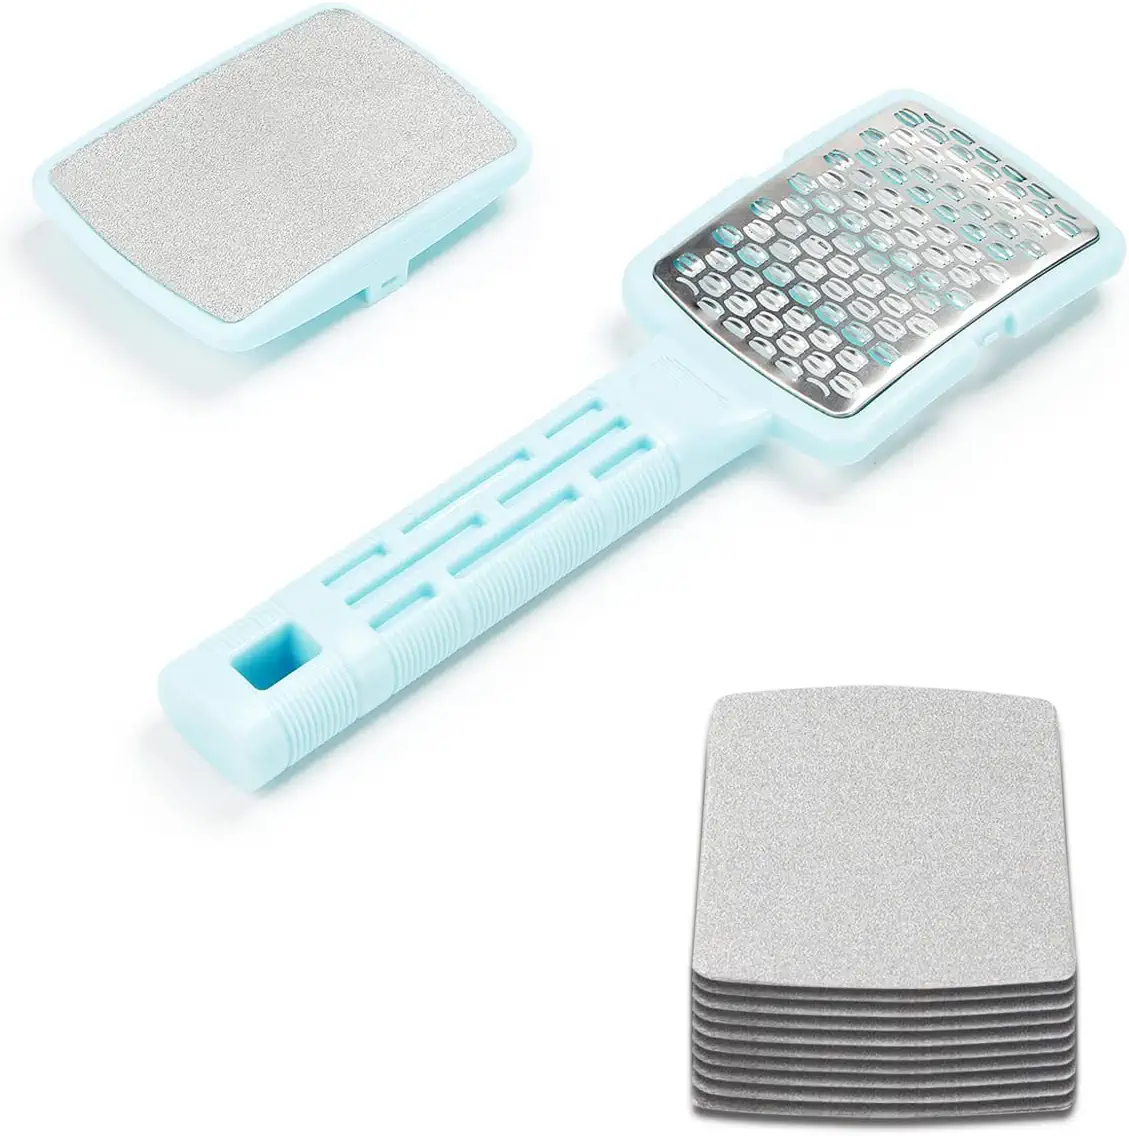 Photo 1 of  Colossal Double-Sided Foot File, Callus Remover for Feet. Made of High-Quality Stainless Steel Foot Scrubber , 10pcs Spare Abrasive Papers.
